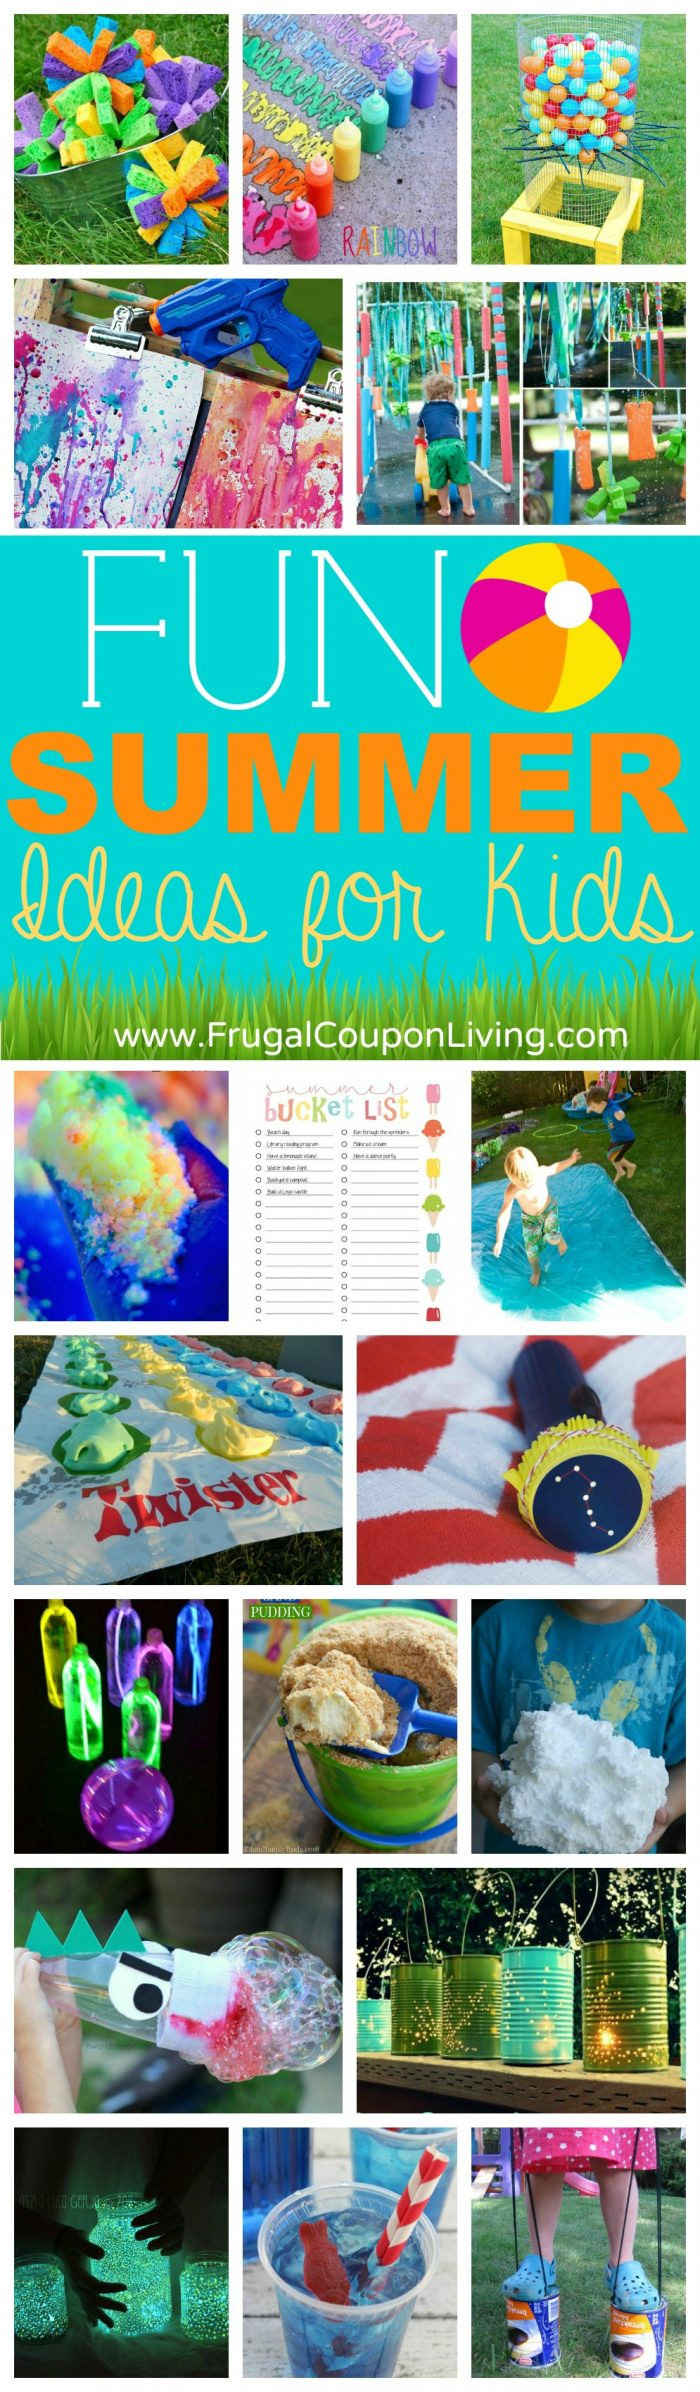 DIY Projects For Toddlers
 DIY Summer Fun Ideas for Kids